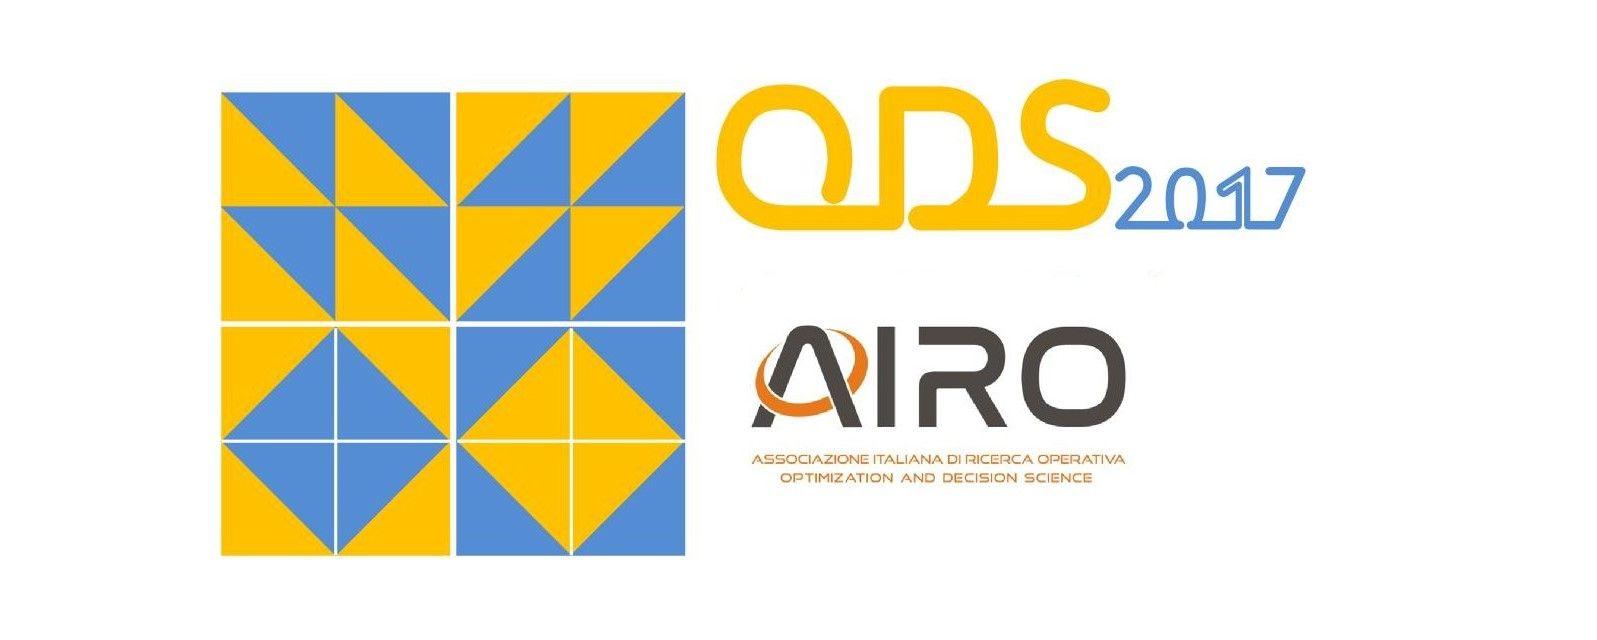 Airo Logo - Airo Conference 2017 - Optimization and Decision Science (ODS) | www ...